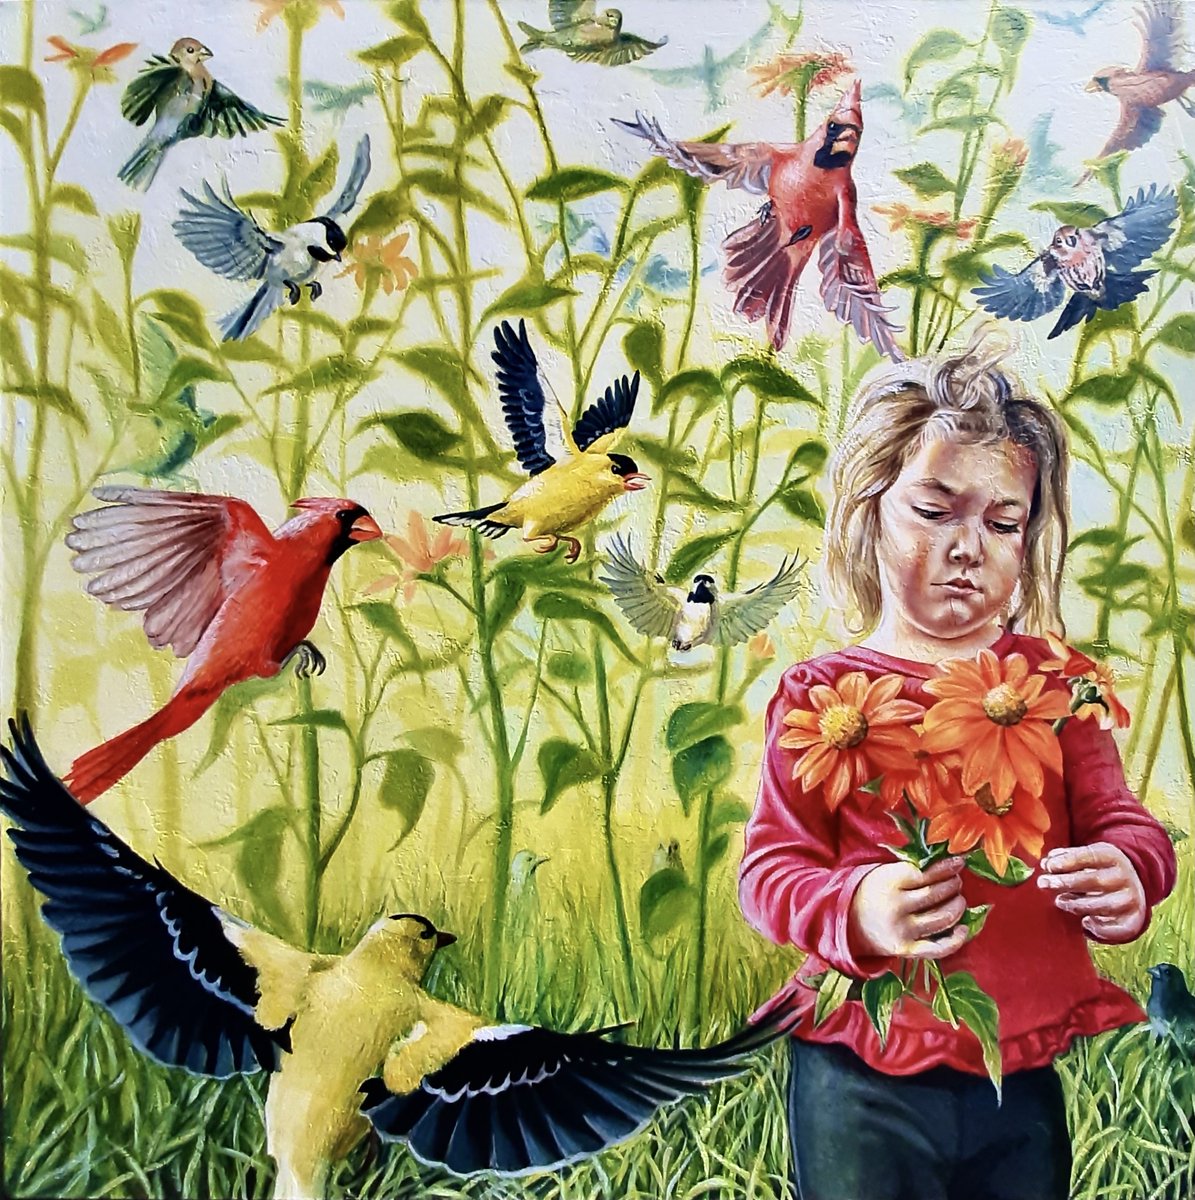 Expounding on Nature, an exhibit featuring 4 local #Baltimore #artists is on display at the Weise Gallery, April 3 - May 17. Come and experience an exhibition that celebrates the natural world, as envisioned by these gifted local talents. @UMBaltimore